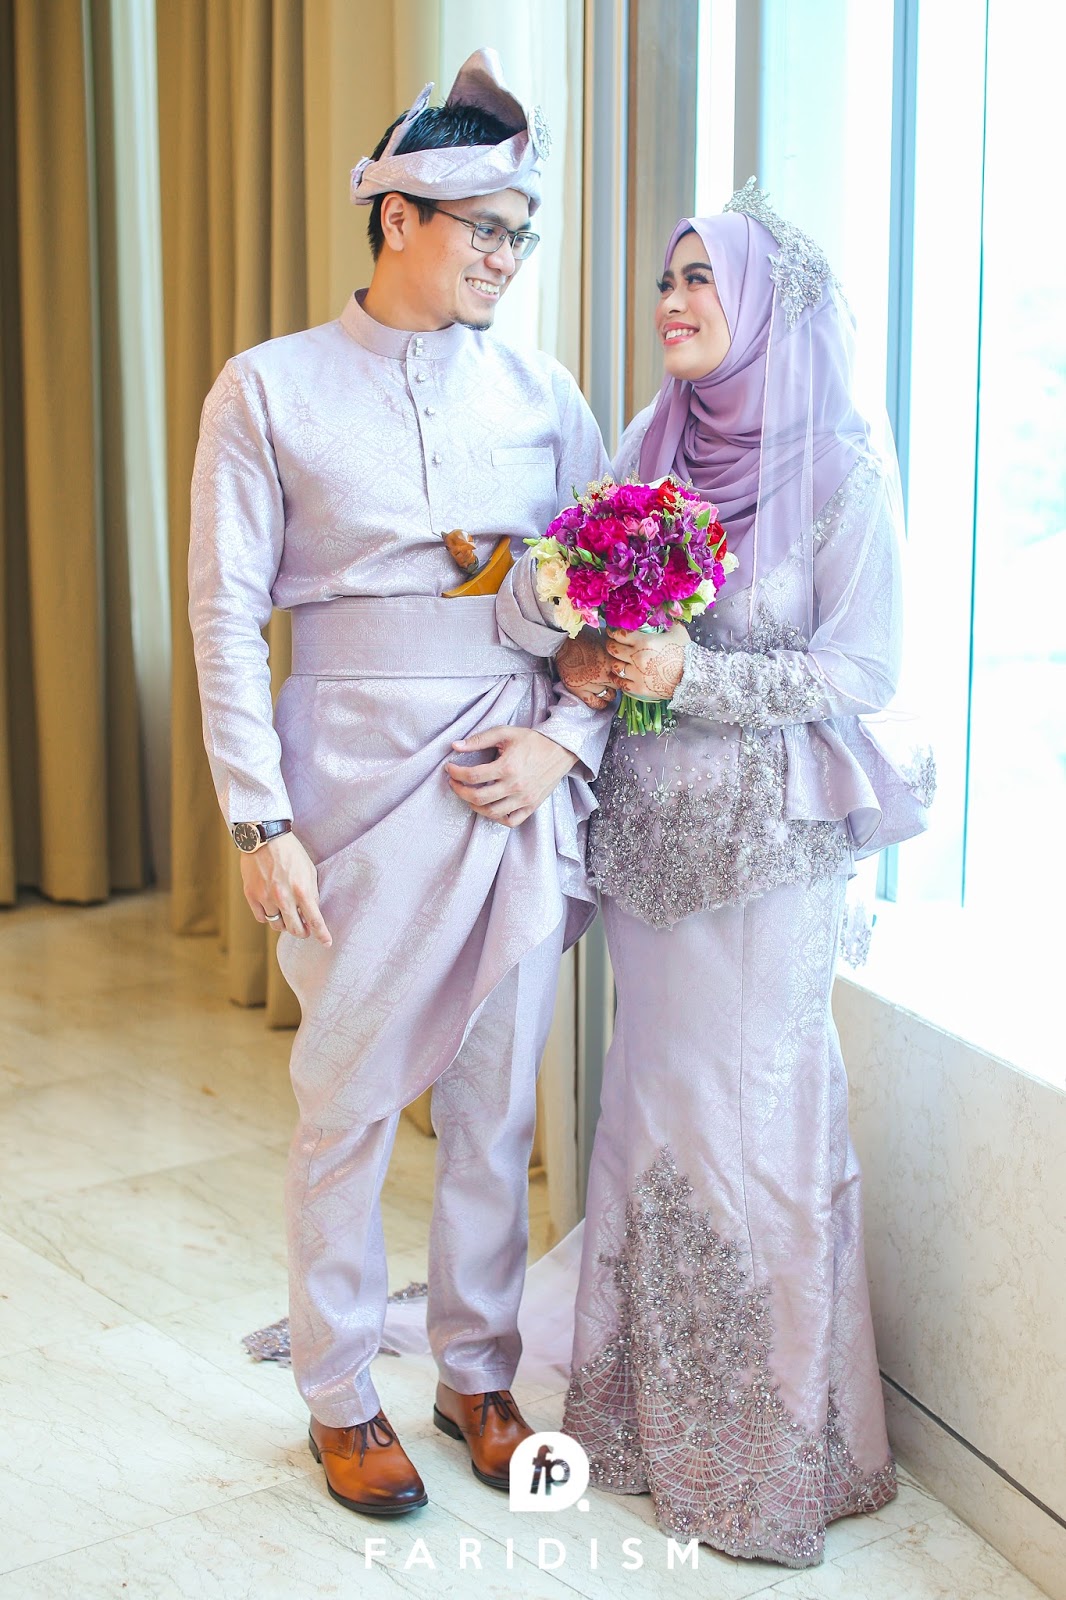 Mohamad Hilmi & Zurina | March 23 & 24, 2018 | Faridism Production